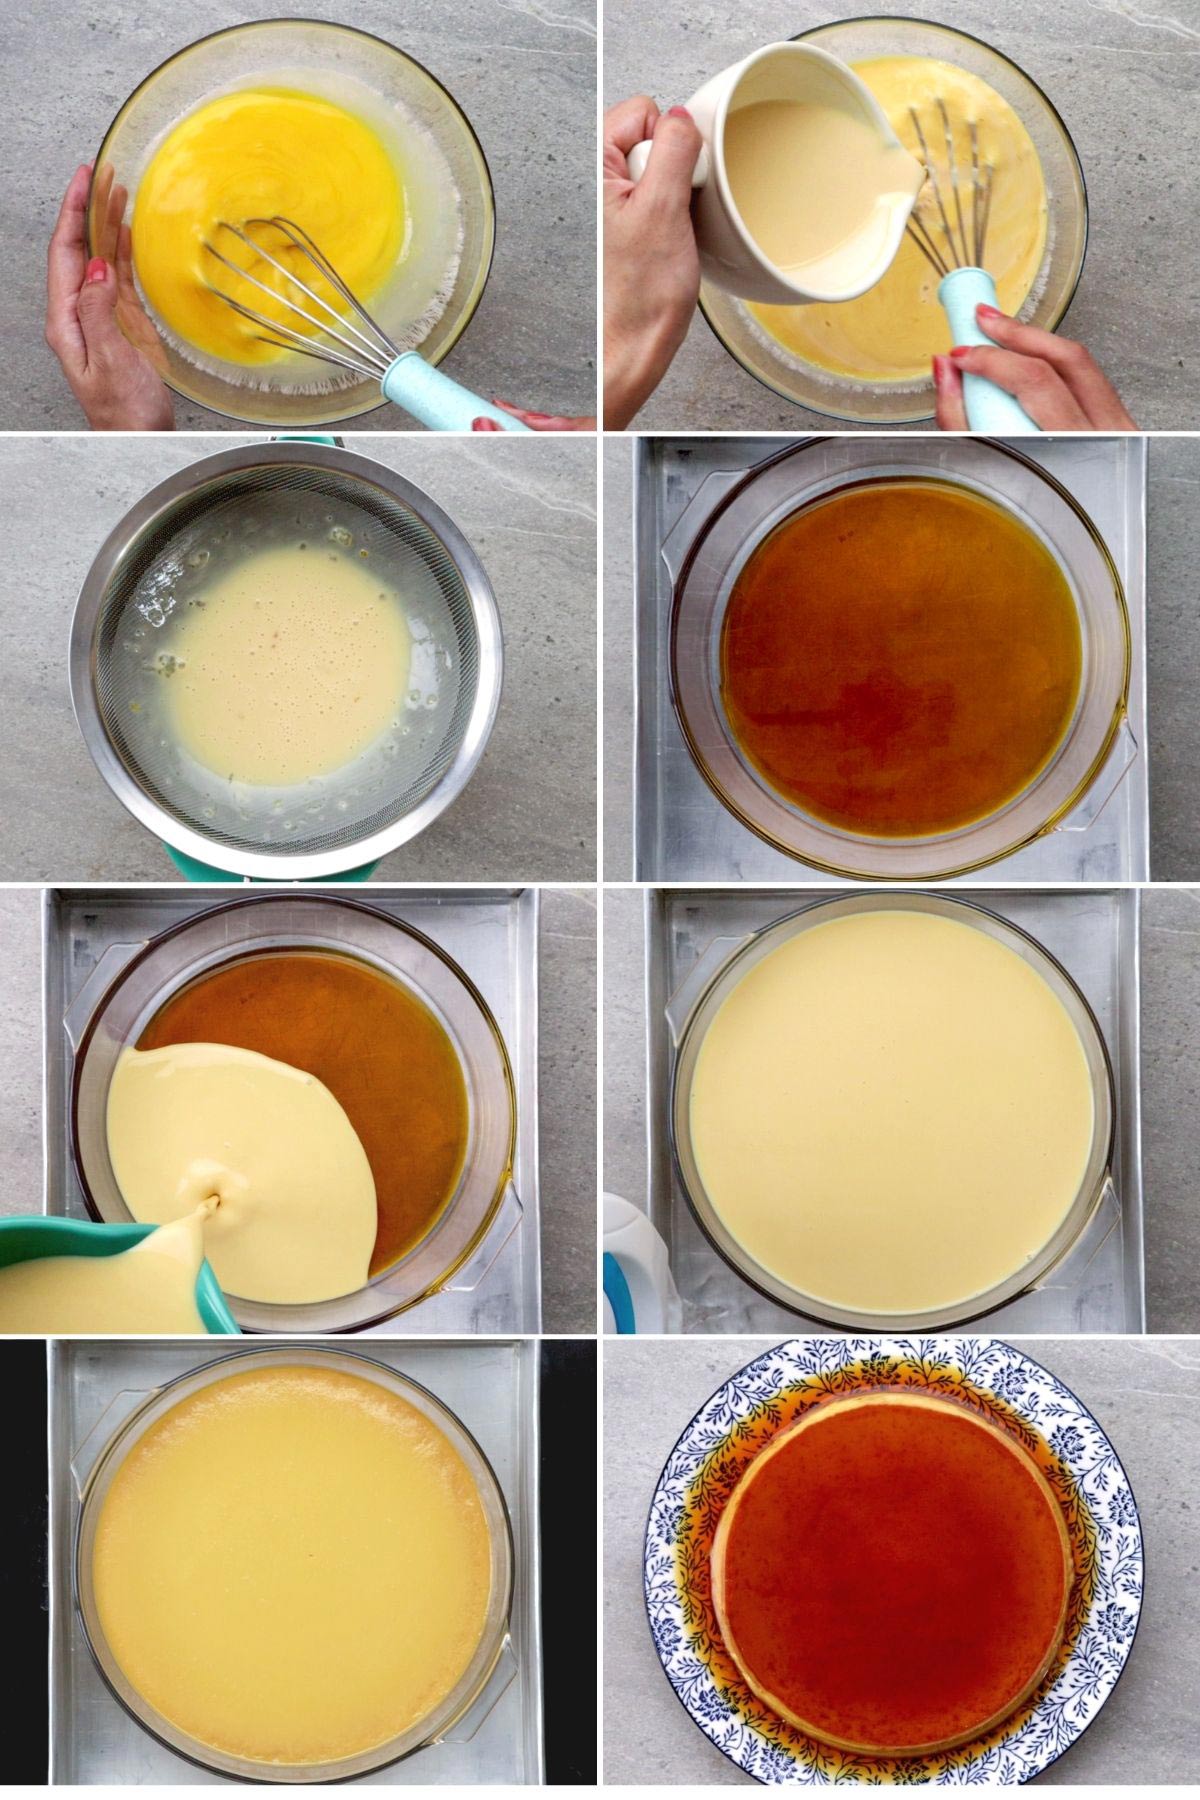 Steps on how to cook whole egg flan.